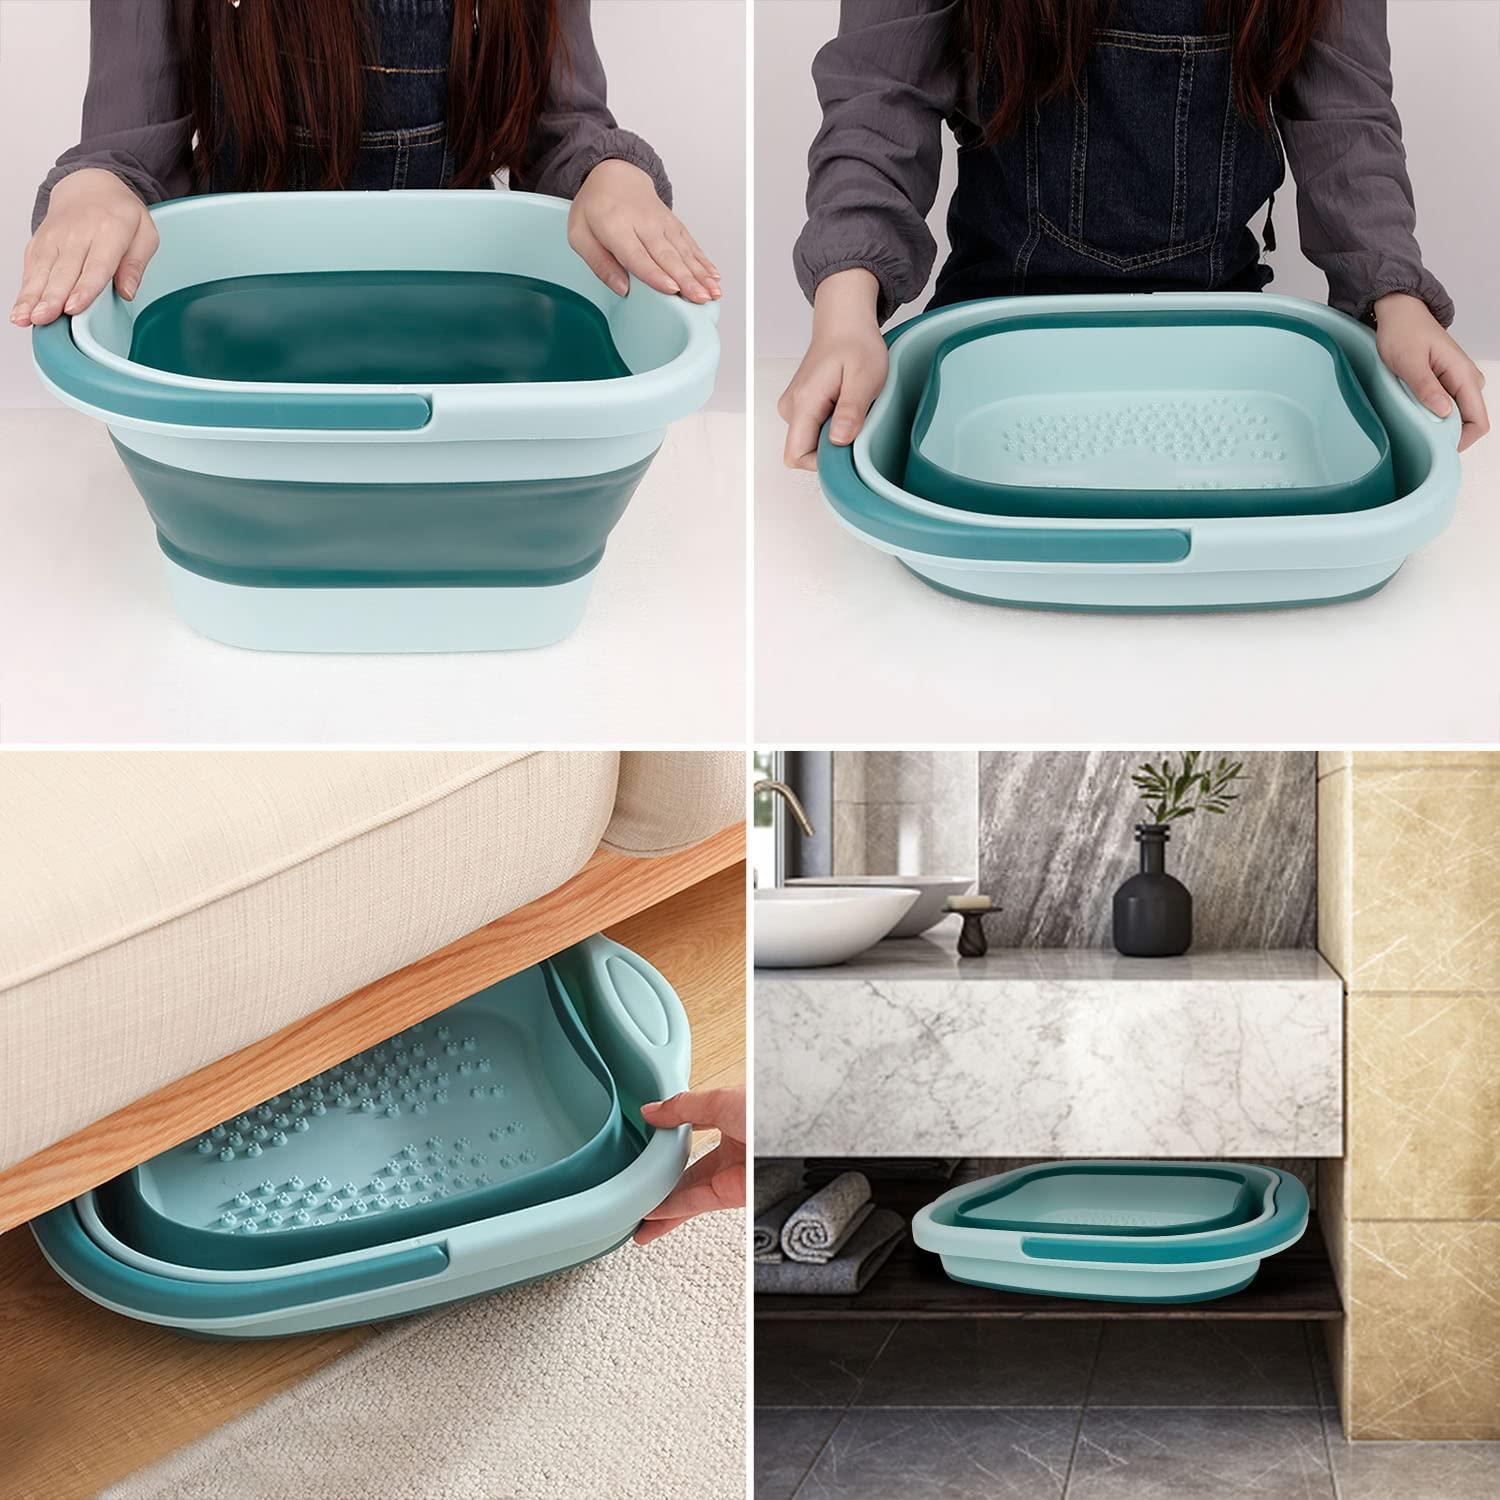 Collapsible Foot Bath Basin, Portable Foot Bucket with Handles